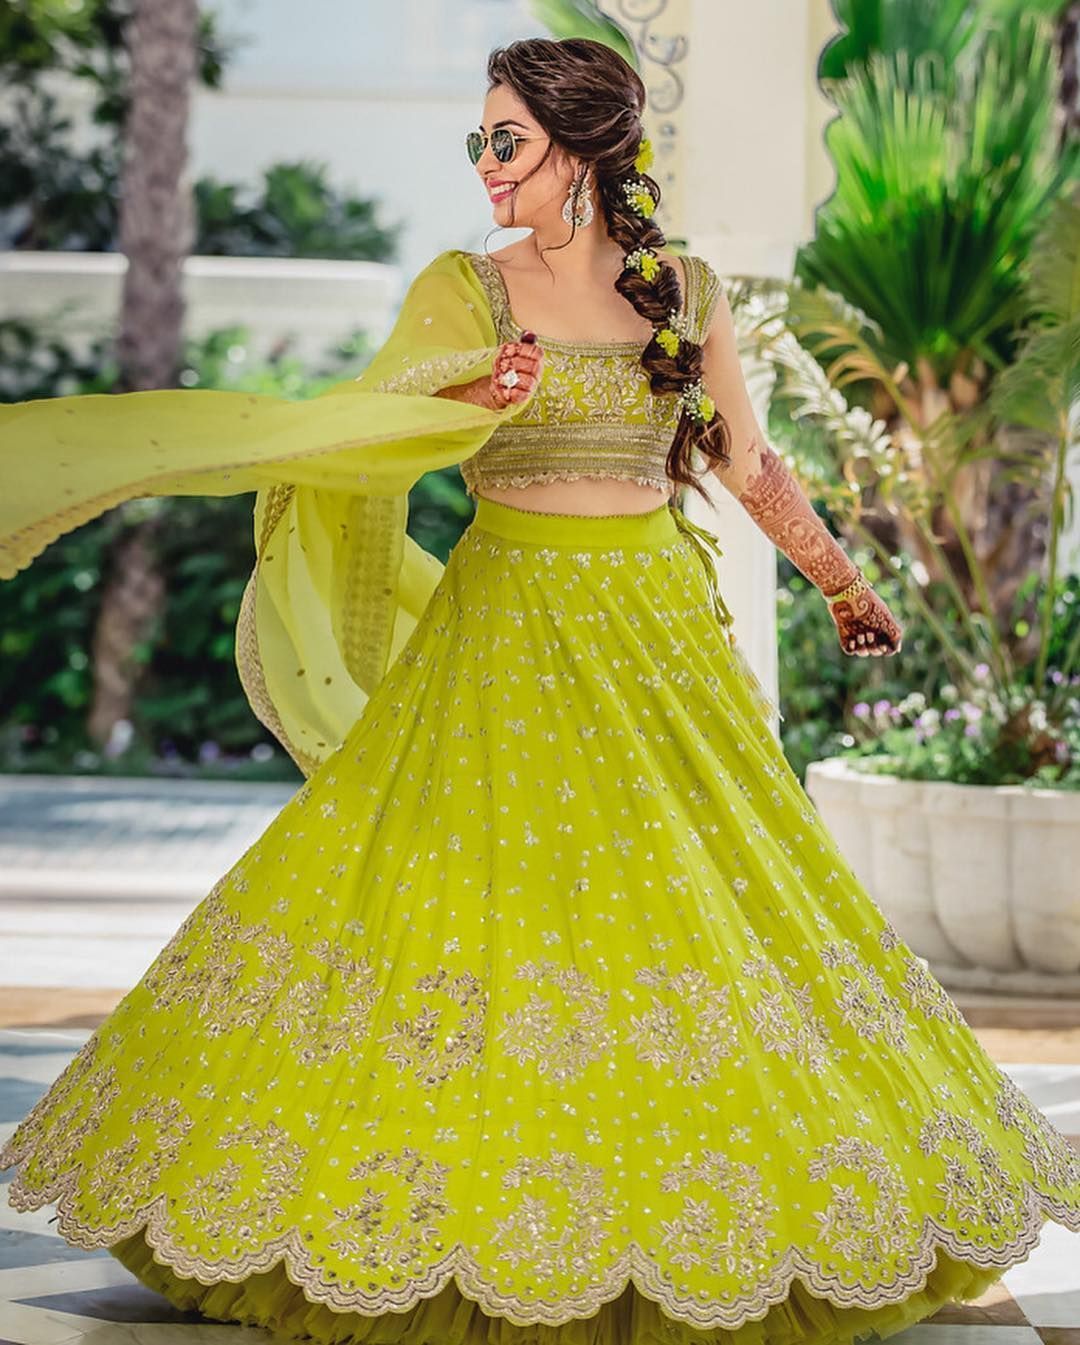 Style inspo for your big fat Indian wedding | Femina.in